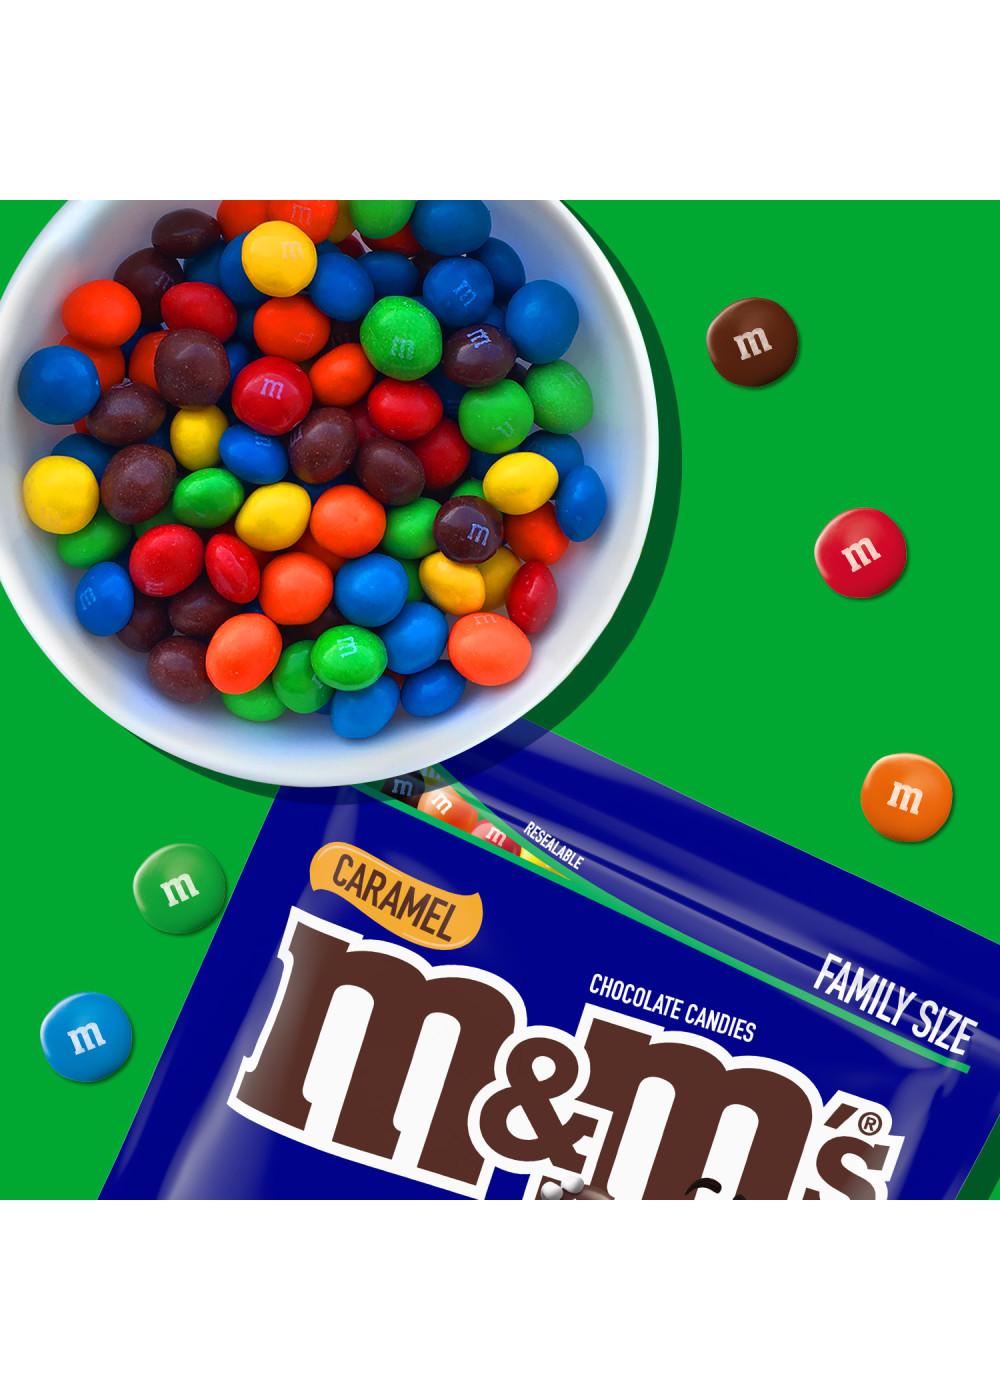 M&M'S Crunchy Cookie Chocolate Candy - Sharing Size - Shop Candy at H-E-B